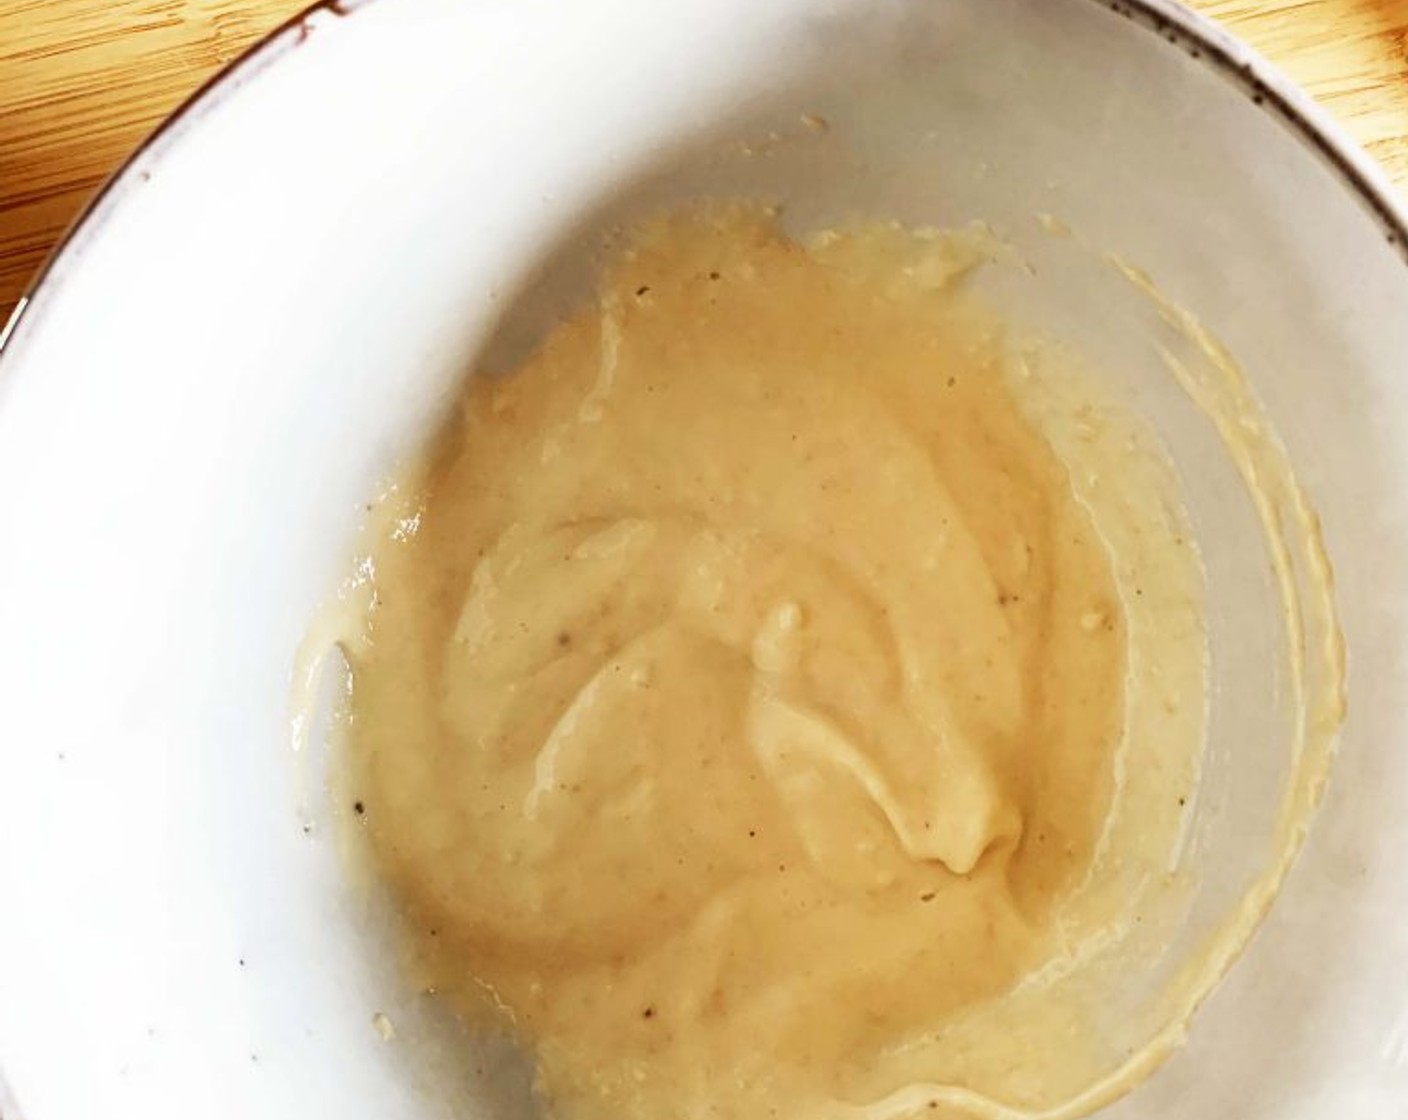 step 2 In a bowl whisk together Cashew Butter (1/2 cup), Organic Egg (1), egg white, Vanilla Extract (1 tsp), and Granulated Erythritol (1/4 cup).